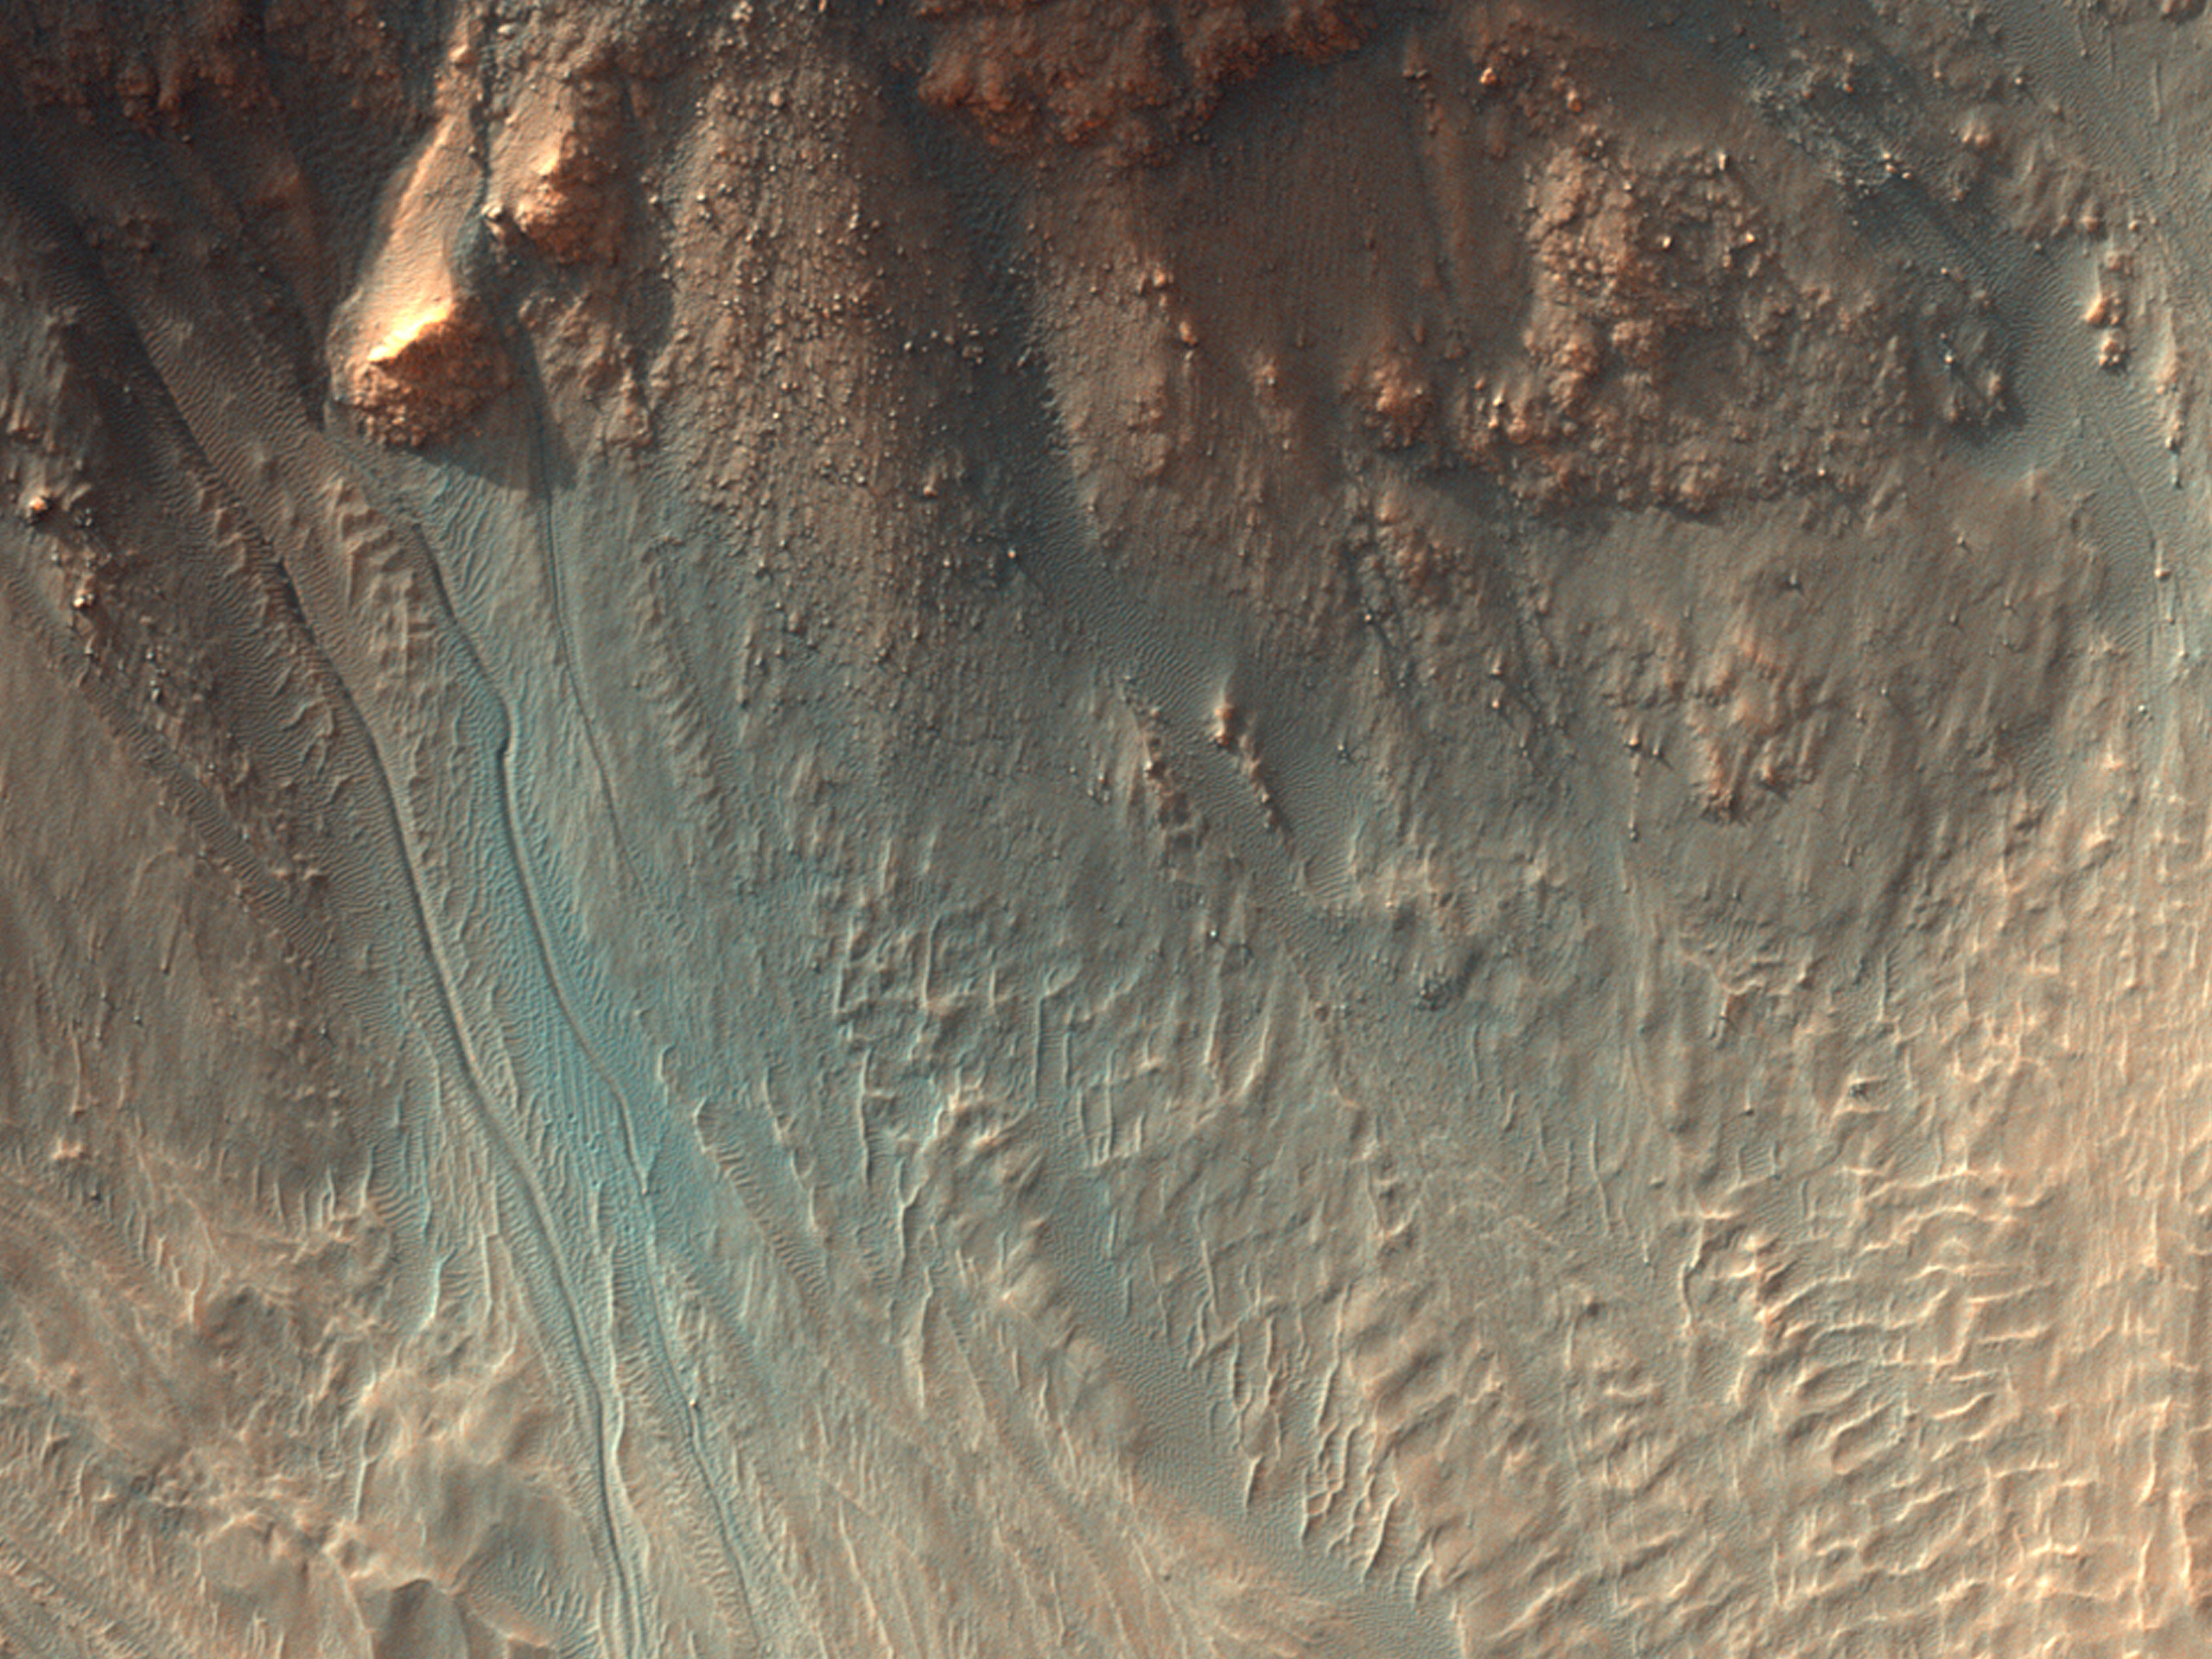 Gullies in a Central Pit Crater